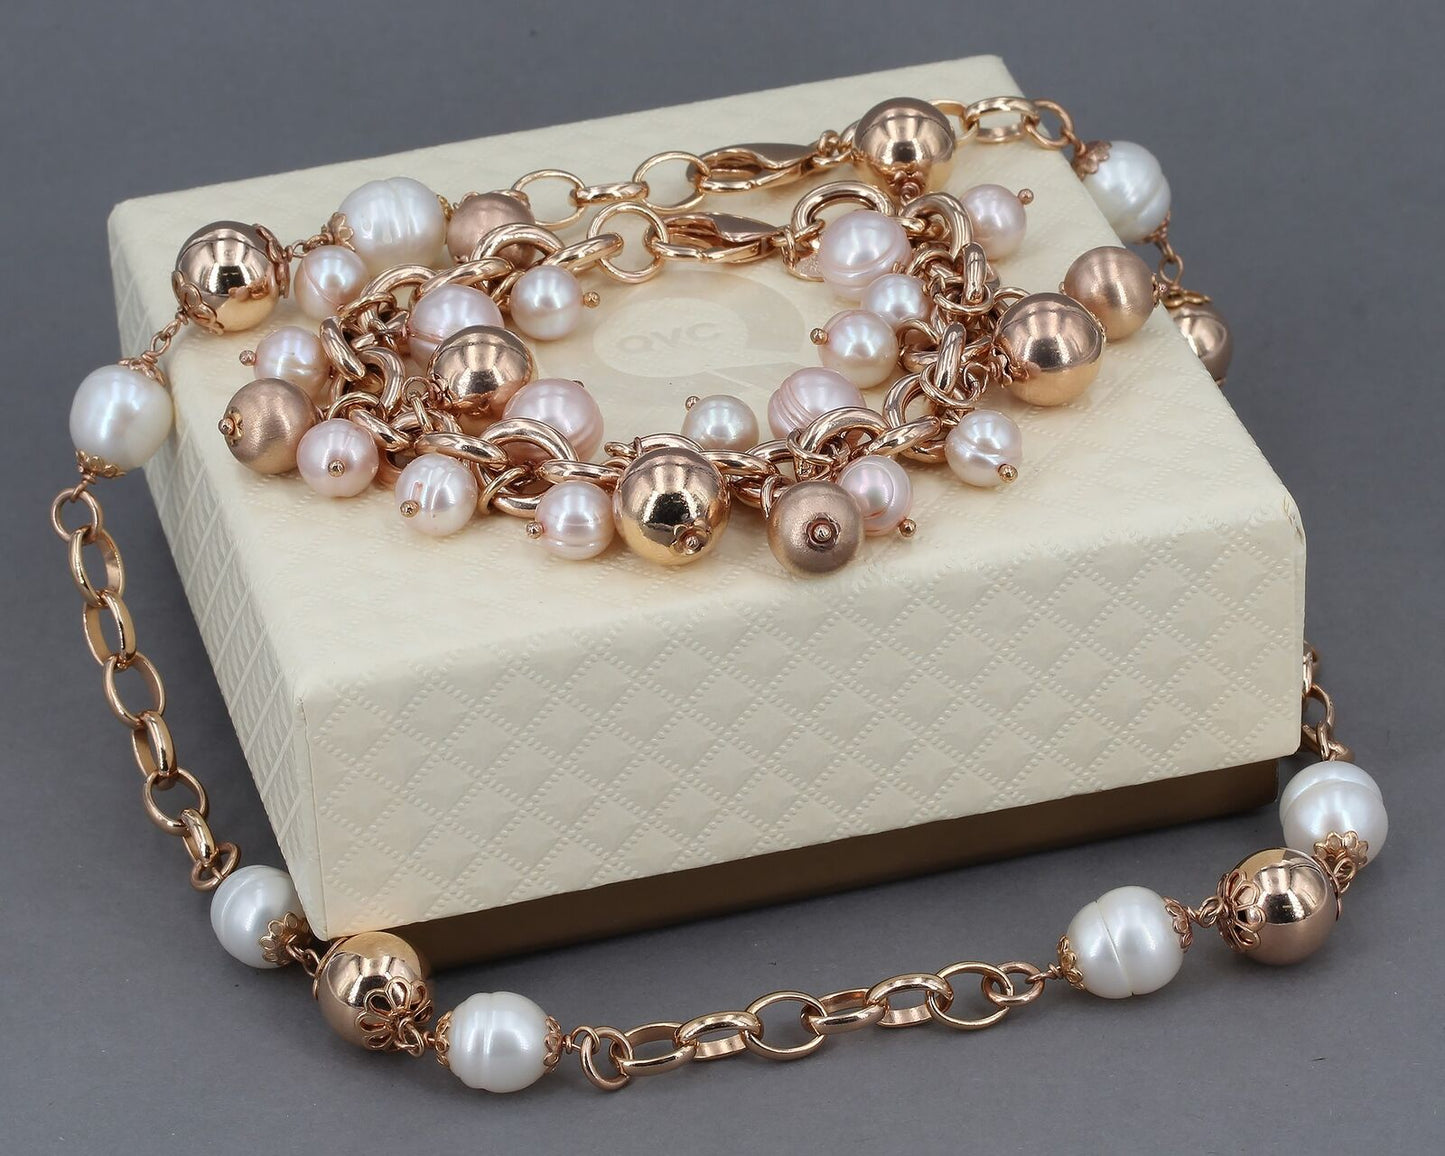 Bronze Honora Freshwater Pearl Station 18" Necklace & 8" Cha-Cha Charm Bracelet